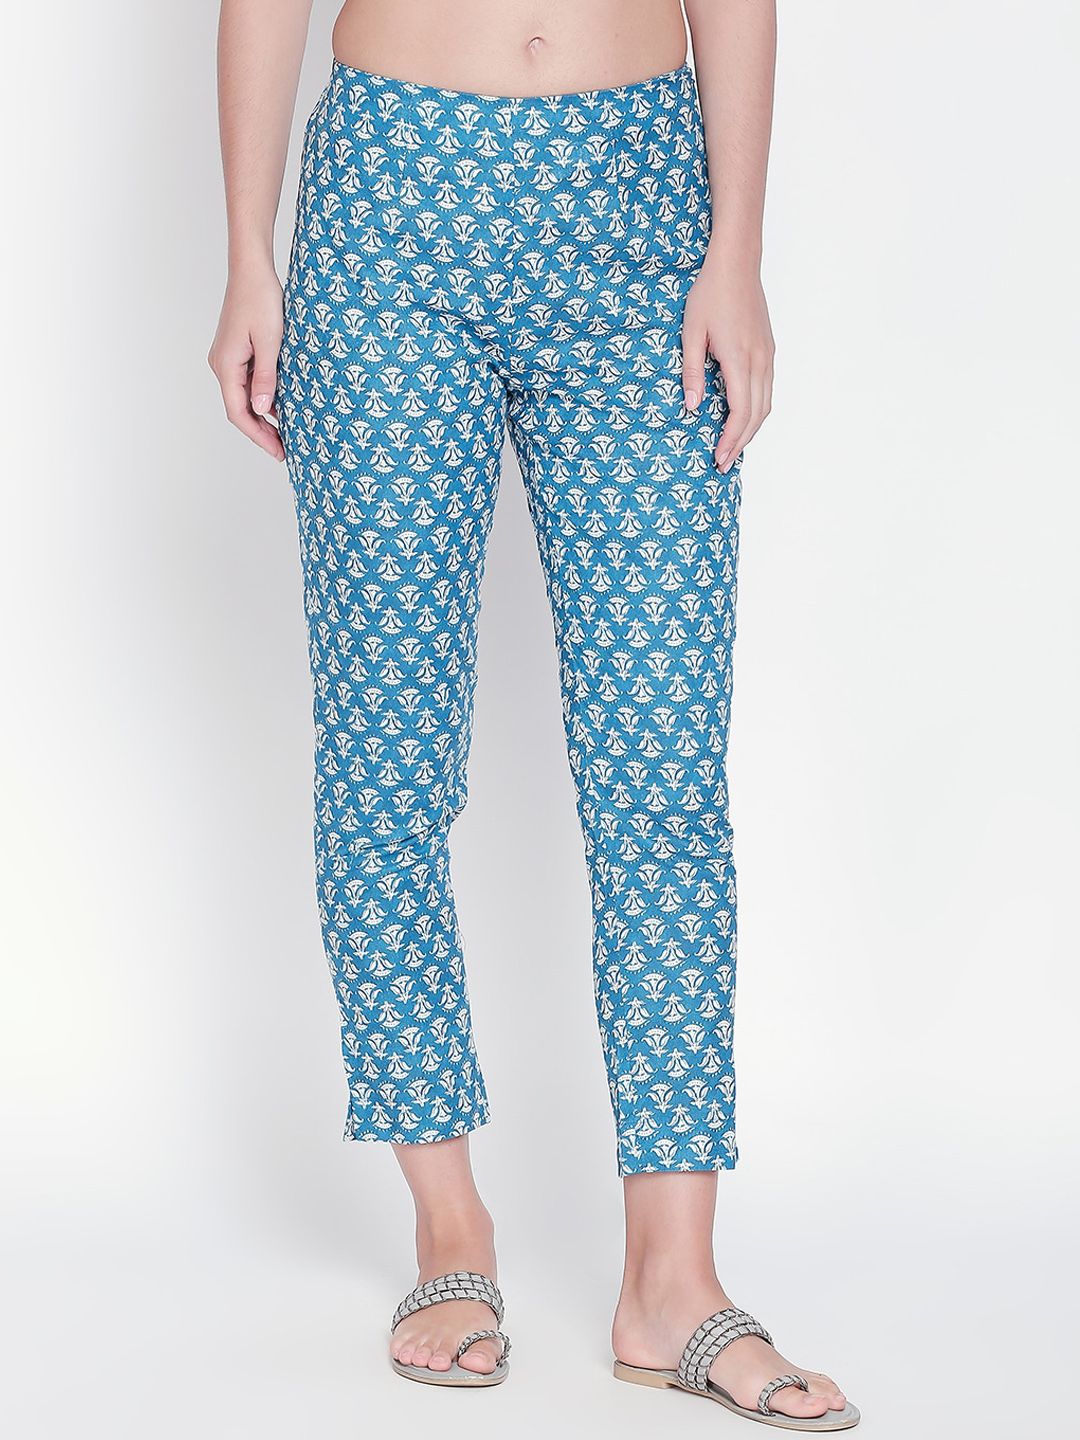 RANGMANCH BY PANTALOONS Women Blue Regular Fit Printed Cigarette Trousers Price in India